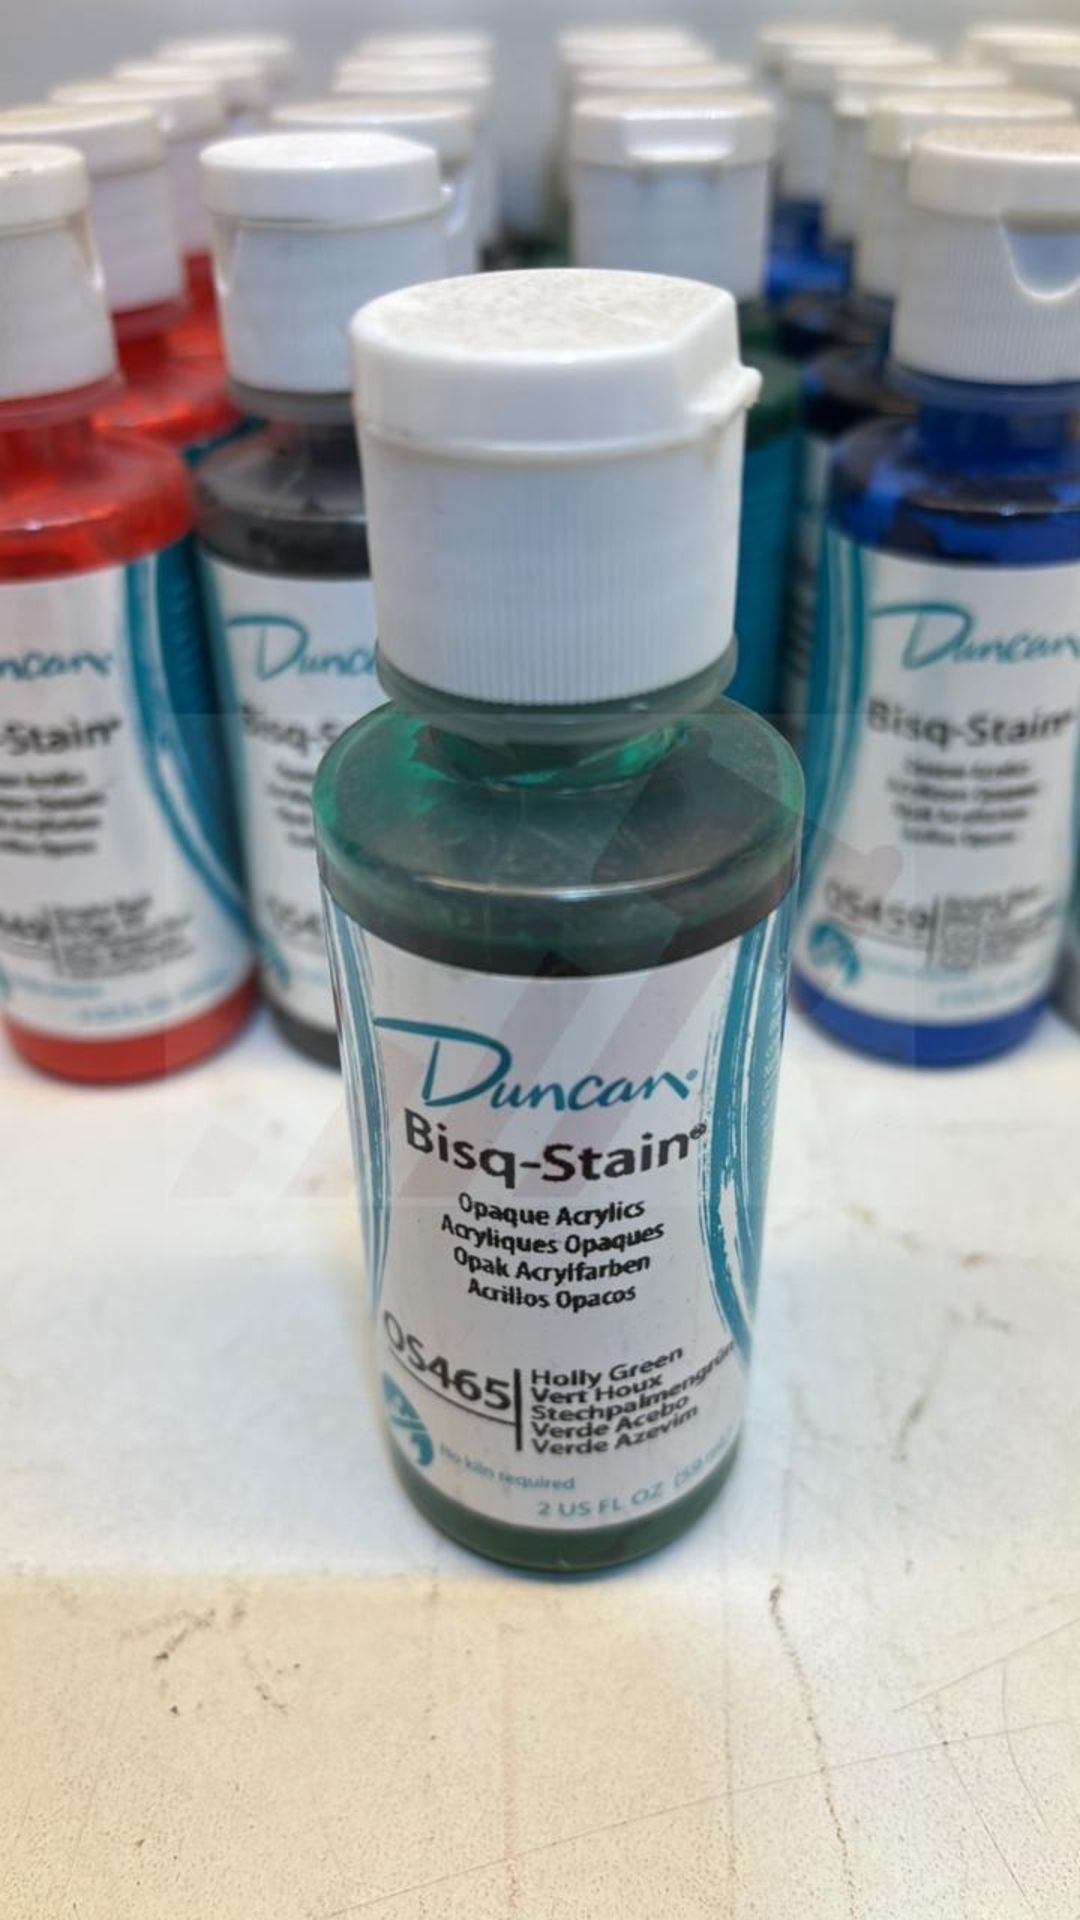 30 x Duncan Bisq-Stain 59ML Bottles Of Acrylic Paints - Image 4 of 7